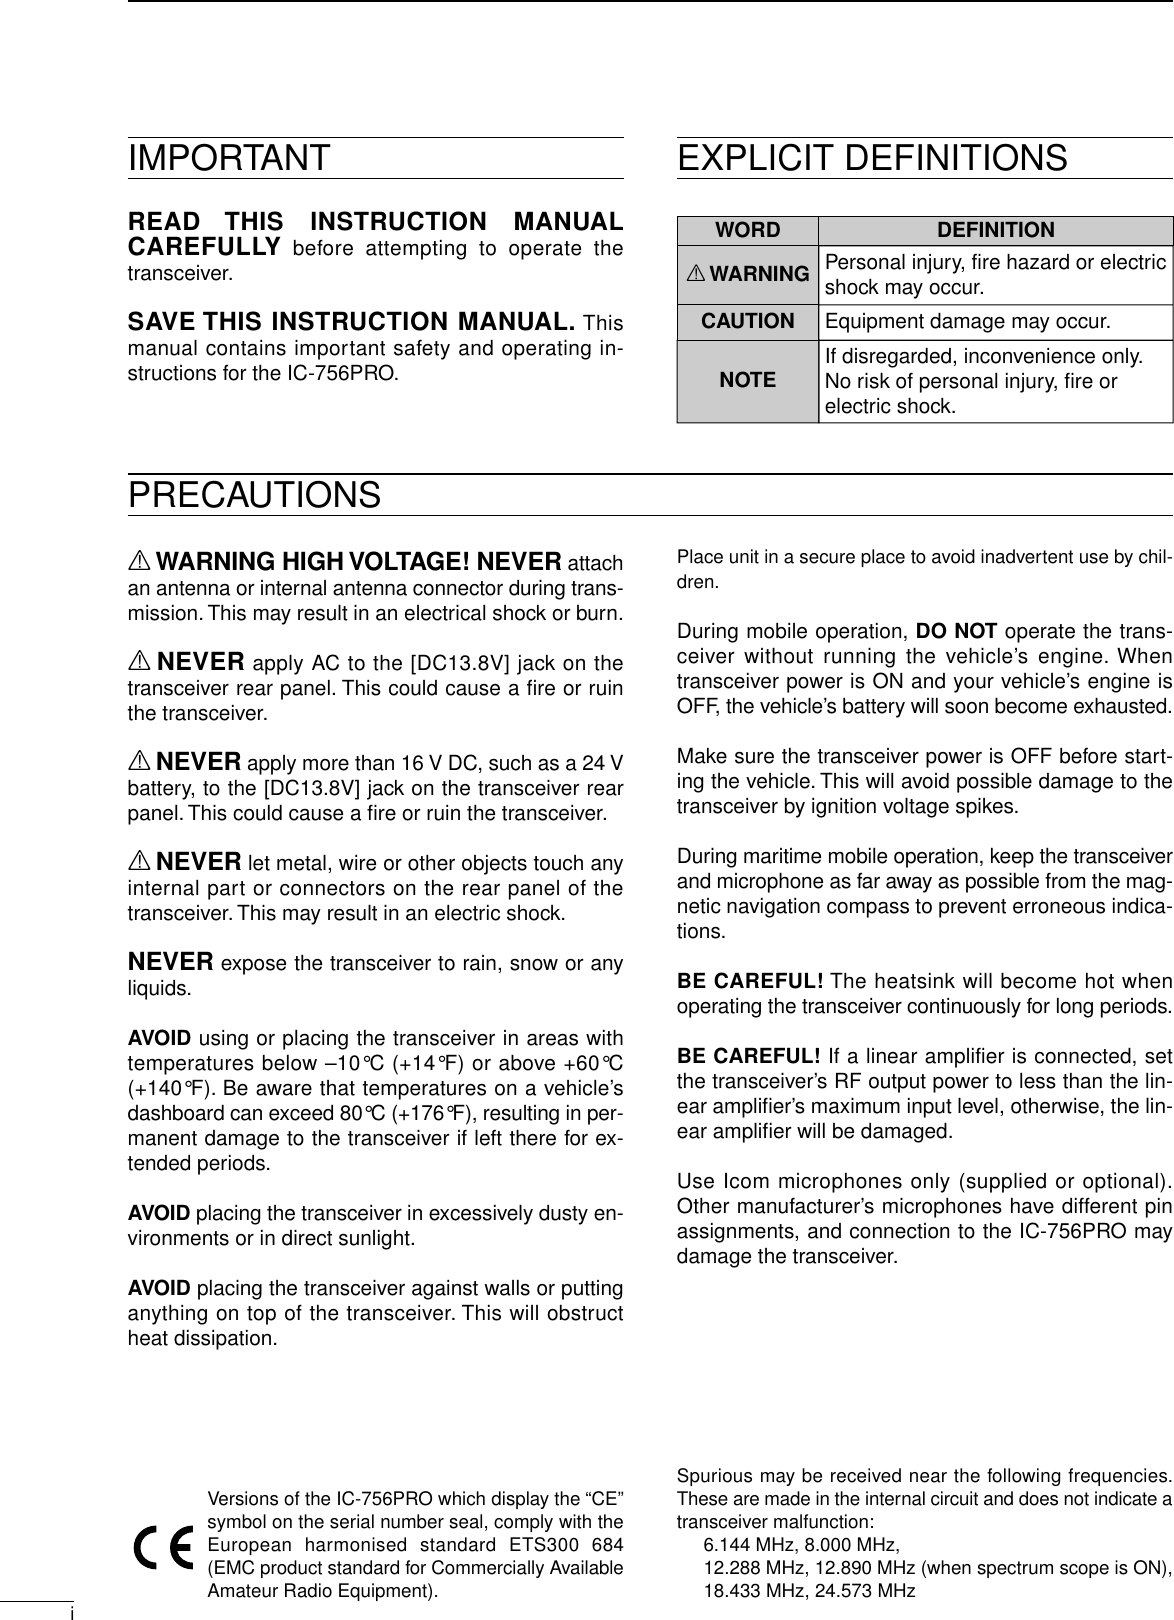 iIMPORTANTREAD THIS INSTRUCTION MANUALCAREFULLY before attempting to operate thetransceiver.SAVE THIS INSTRUCTION MANUAL. Thismanual contains important safety and operating in-structions for the IC-756PRO.EXPLICIT DEFINITIONSRWARNING HIGH VOLTAGE! NEVER attachan antenna or internal antenna connector during trans-mission. This may result in an electrical shock or burn.RNEVER apply AC to the [DC13.8V] jack on thetransceiver rear panel. This could cause a ﬁre or ruinthe transceiver.RNEVER apply more than 16 V DC, such as a 24 Vbattery, to the [DC13.8V] jack on the transceiver rearpanel. This could cause a ﬁre or ruin the transceiver.RNEVER let metal, wire or other objects touch anyinternal part or connectors on the rear panel of thetransceiver. This may result in an electric shock.NEVER expose the transceiver to rain, snow or anyliquids.AVOID using or placing the transceiver in areas withtemperatures below –10°C (+14°F) or above +60°C(+140°F). Be aware that temperatures on a vehicle’sdashboard can exceed 80°C (+176°F), resulting in per-manent damage to the transceiver if left there for ex-tended periods.AVOID placing the transceiver in excessively dusty en-vironments or in direct sunlight.AVOID placing the transceiver against walls or puttinganything on top of the transceiver. This will obstructheat dissipation.Place unit in a secure place to avoid inadvertent use by chil-dren.During mobile operation, DO NOT operate the trans-ceiver without running the vehicle’s engine. Whentransceiver power is ON and your vehicle’s engine isOFF, the vehicle’s battery will soon become exhausted.Make sure the transceiver power is OFF before start-ing the vehicle. This will avoid possible damage to thetransceiver by ignition voltage spikes.During maritime mobile operation, keep the transceiverand microphone as far away as possible from the mag-netic navigation compass to prevent erroneous indica-tions.BE CAREFUL! The heatsink will become hot whenoperating the transceiver continuously for long periods.BE CAREFUL! If a linear amplifier is connected, setthe transceiver’s RF output power to less than the lin-ear ampliﬁer’s maximum input level, otherwise, the lin-ear ampliﬁer will be damaged.Use Icom microphones only (supplied or optional).Other manufacturer’s microphones have different pinassignments, and connection to the IC-756PRO maydamage the transceiver.PRECAUTIONSVersions of the IC-756PRO which display the “CE”symbol on the serial number seal, comply with theEuropean harmonised standard ETS300 684(EMC product standard for Commercially AvailableAmateur Radio Equipment).WORDR WARNINGCAUTIONNOTEDEFINITIONPersonal injury, fire hazard or electric shock may occur.If disregarded, inconvenience only. No risk of personal injury, fire or electric shock.Equipment damage may occur.Spurious may be received near the following frequencies.These are made in the internal circuit and does not indicate atransceiver malfunction:6.144 MHz, 8.000 MHz, 12.288 MHz, 12.890 MHz (when spectrum scope is ON), 18.433 MHz, 24.573 MHz